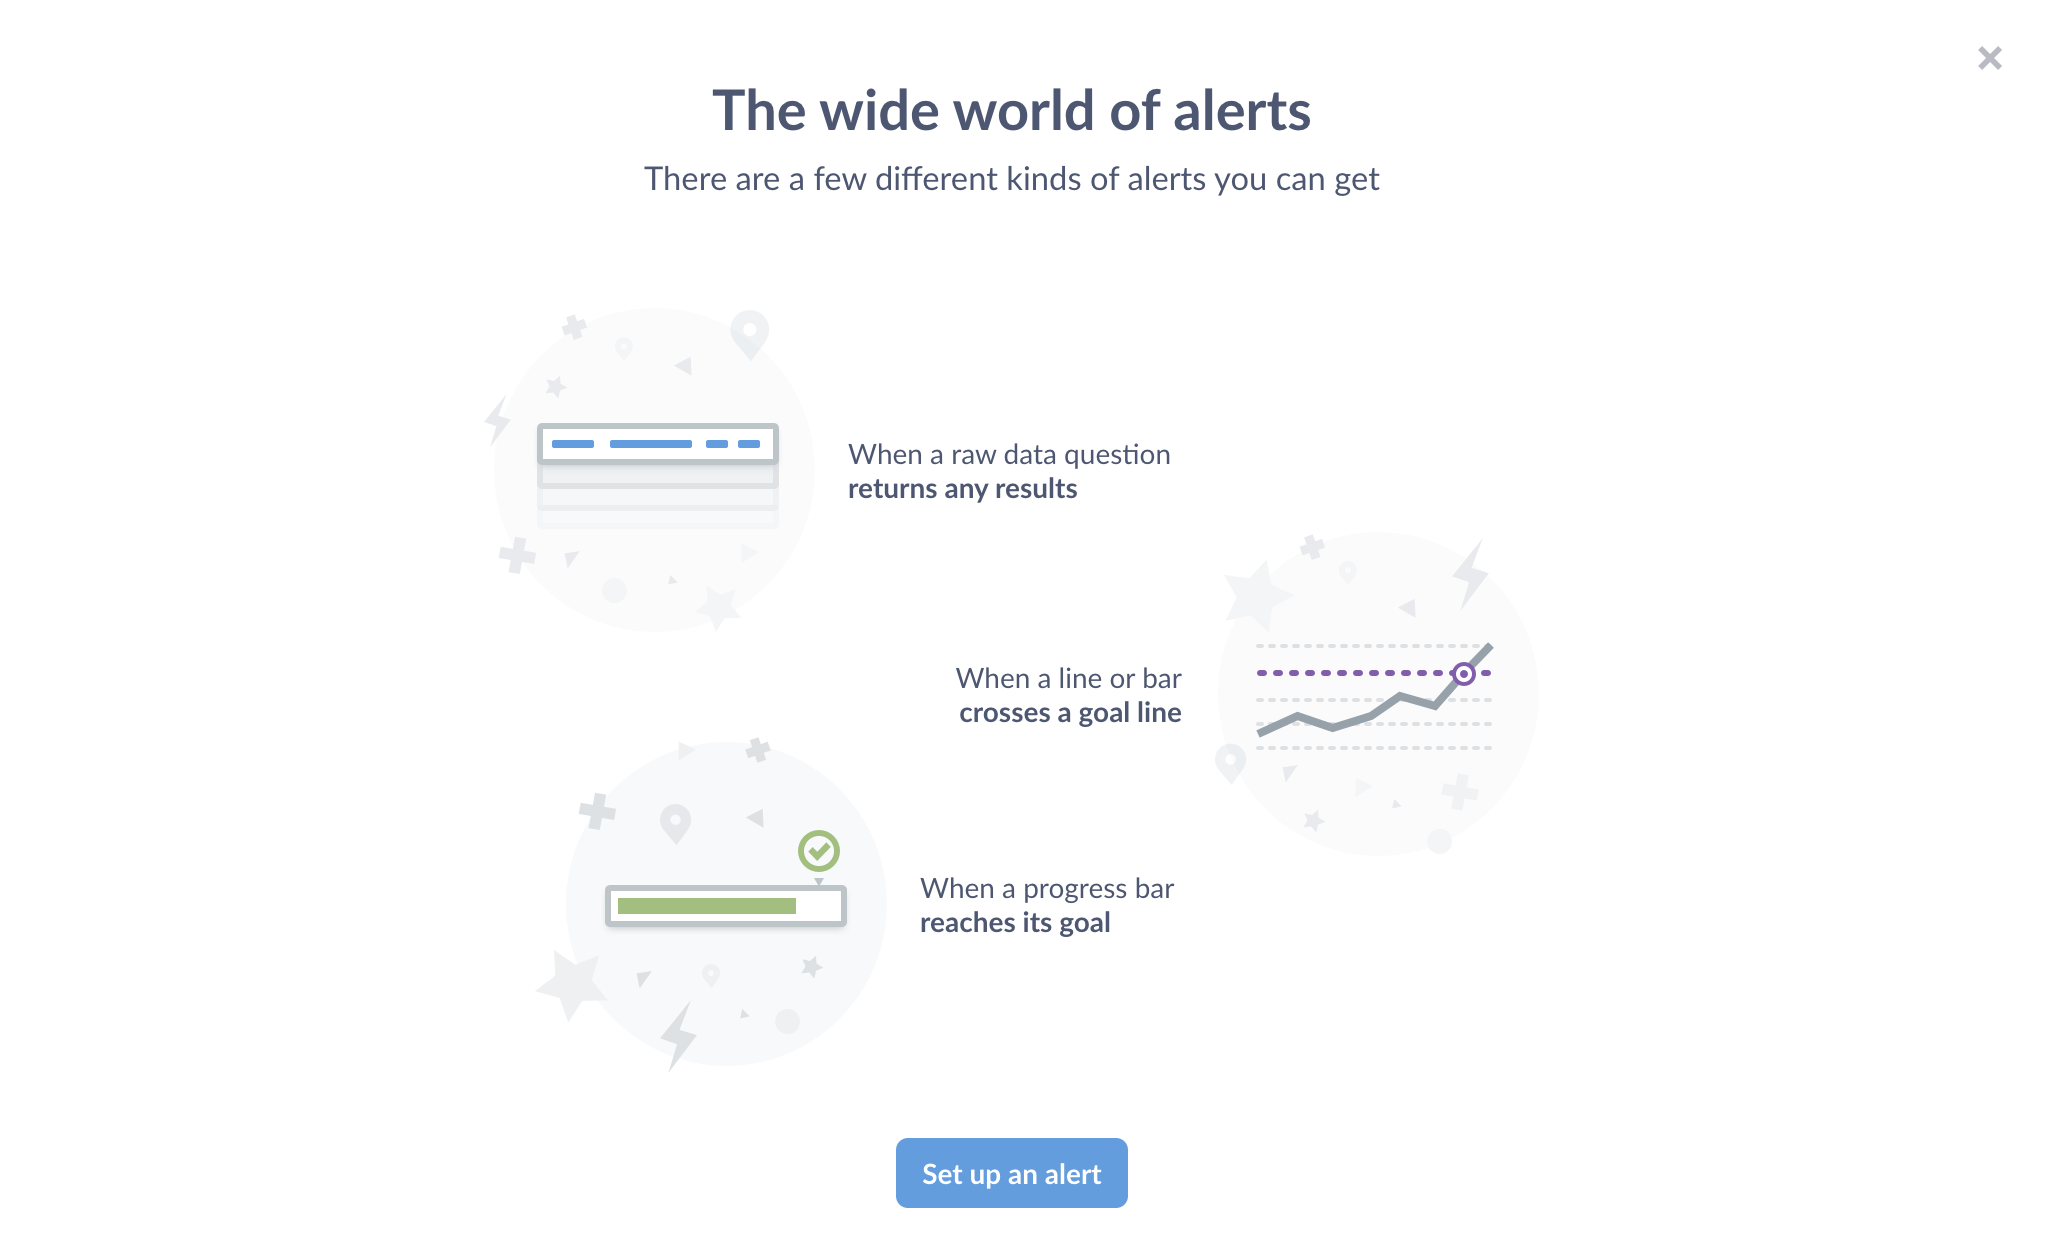 Different kinds of alerts: When a raw data question returns any results, when a line or bar crosses a goal line, or when a progress bar reaches its goal.